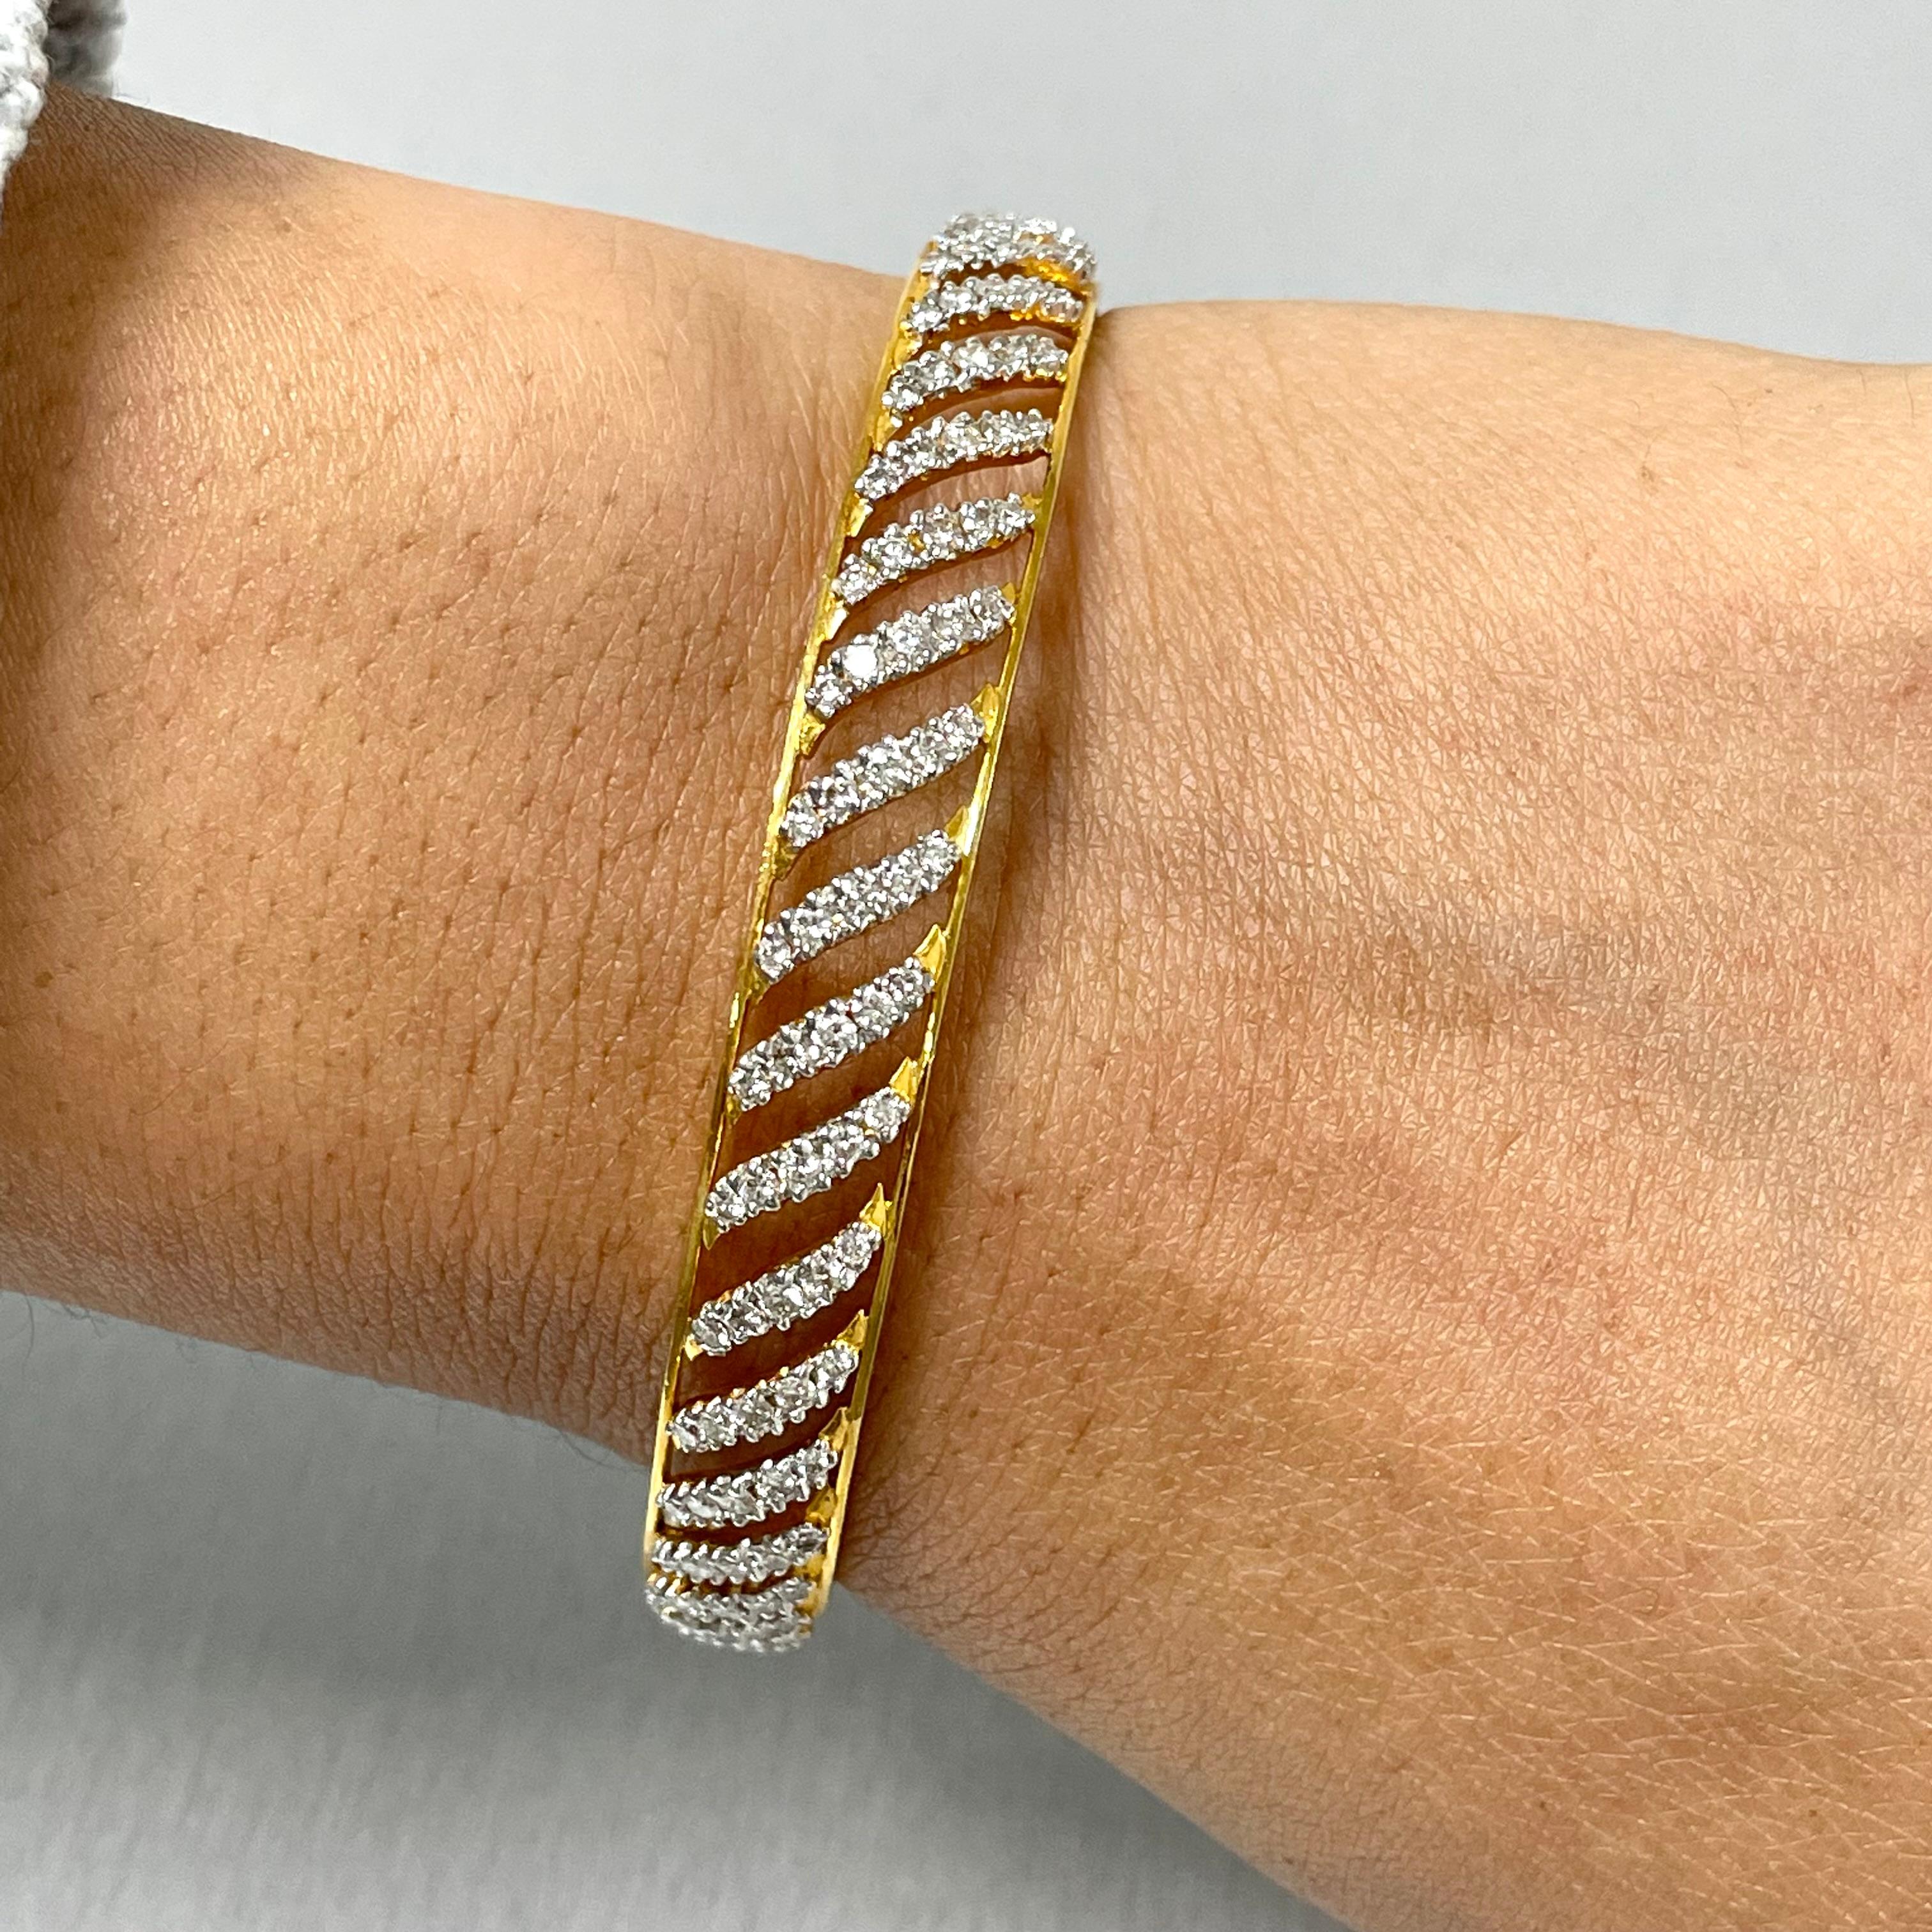 The Curves Bangles Set is inspired and created to reflect Indian tradition and design. With diamonds studded in a yellow gold, these bangles exude an ethereal glow.

Total Diamond Weight: 7.70 ct 
No. of Diamonds: 400
Diamond Color: G - H
Diamond